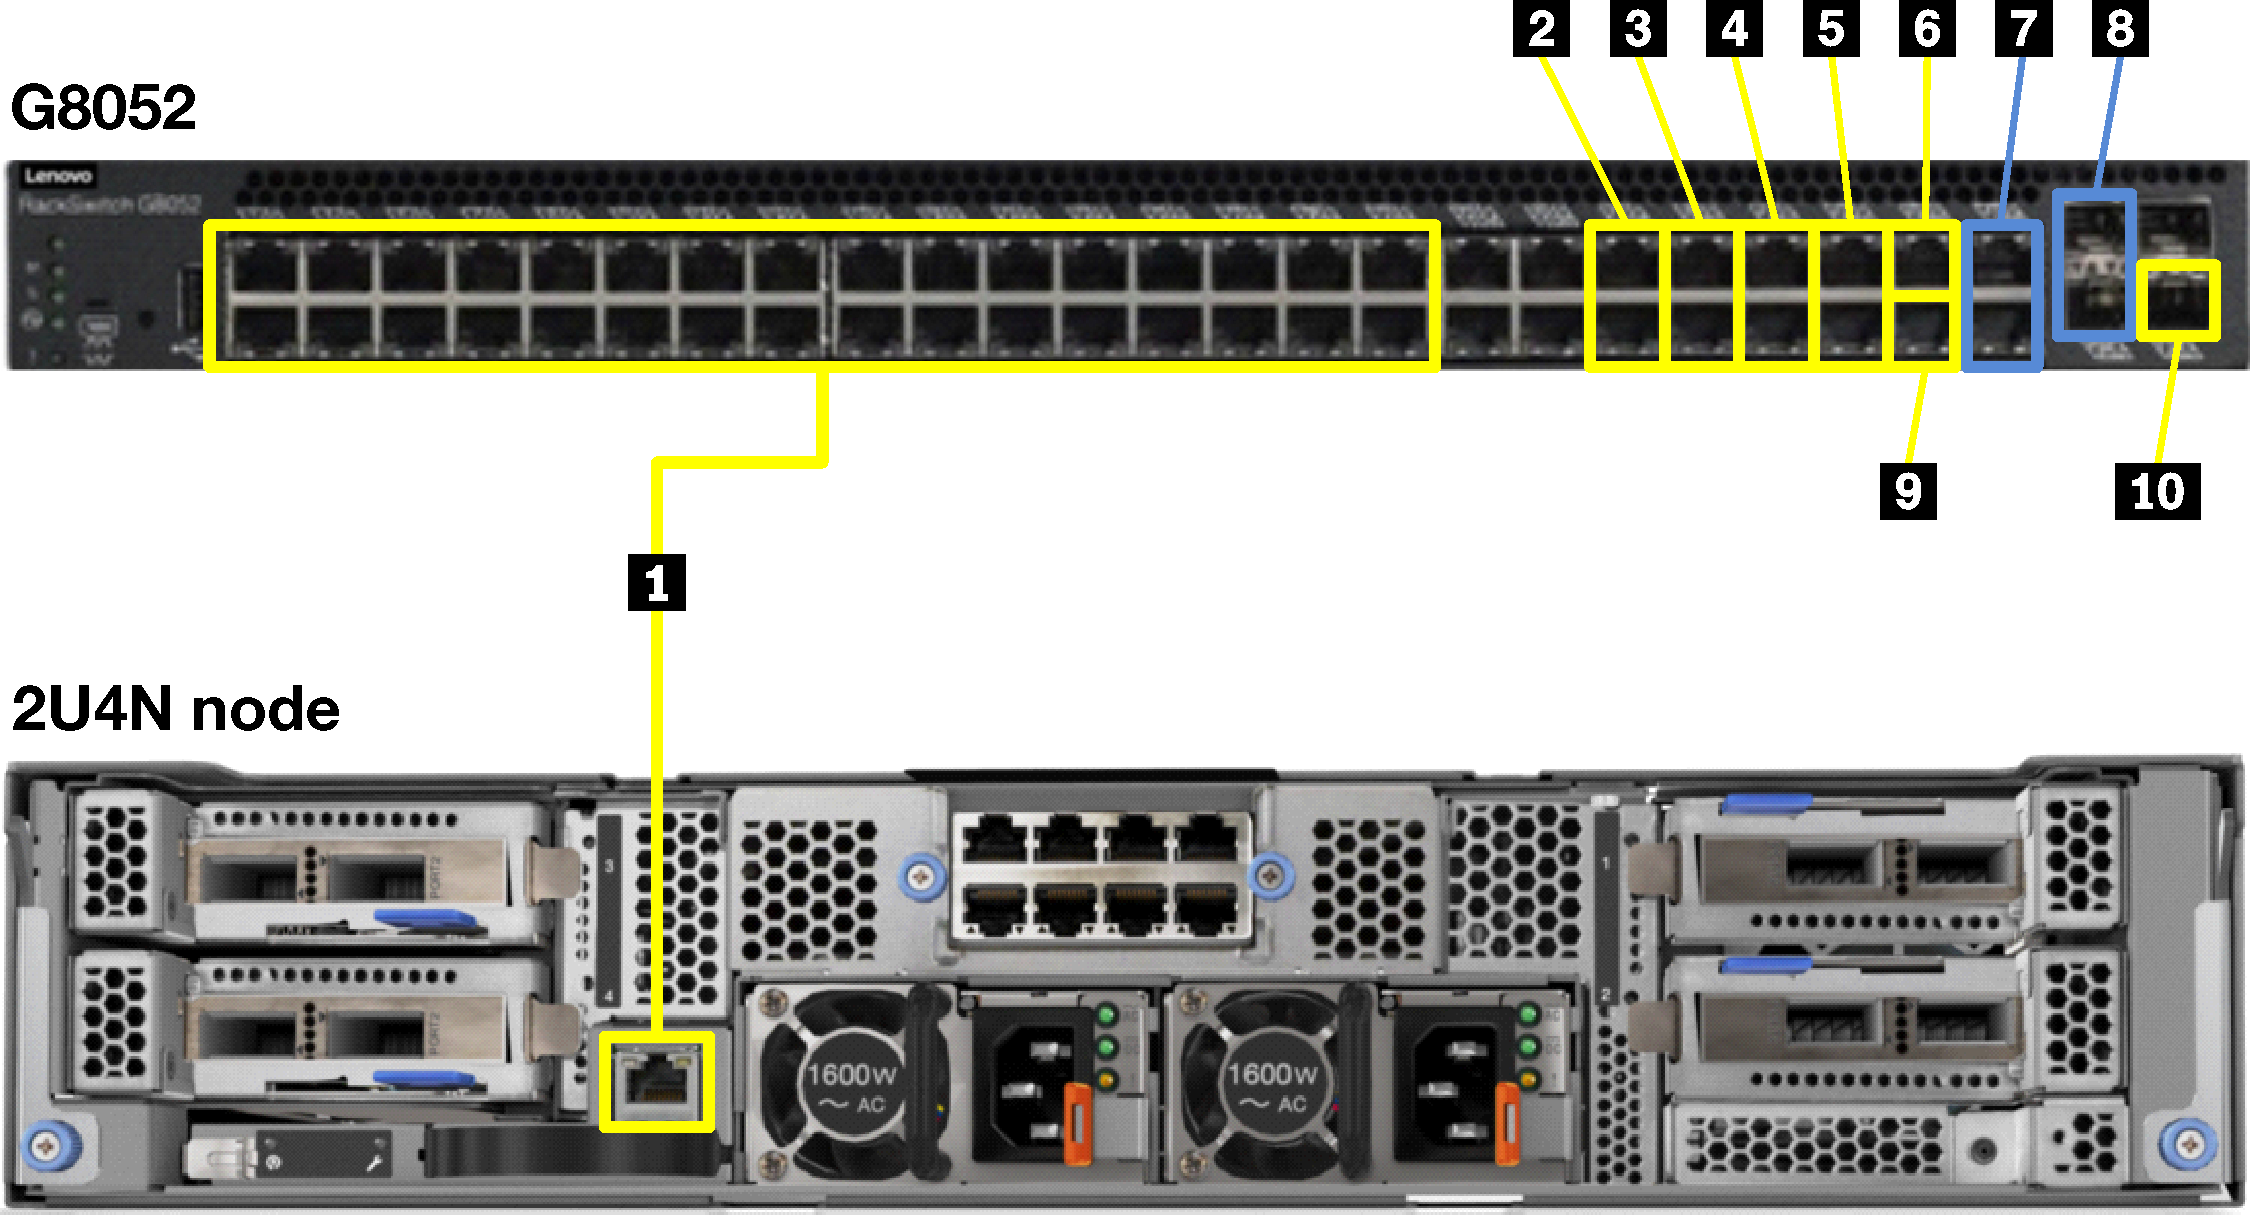 Graphic showing RackSwitch G8052 cabling for 2U4N enclosures (SXN3000 only)